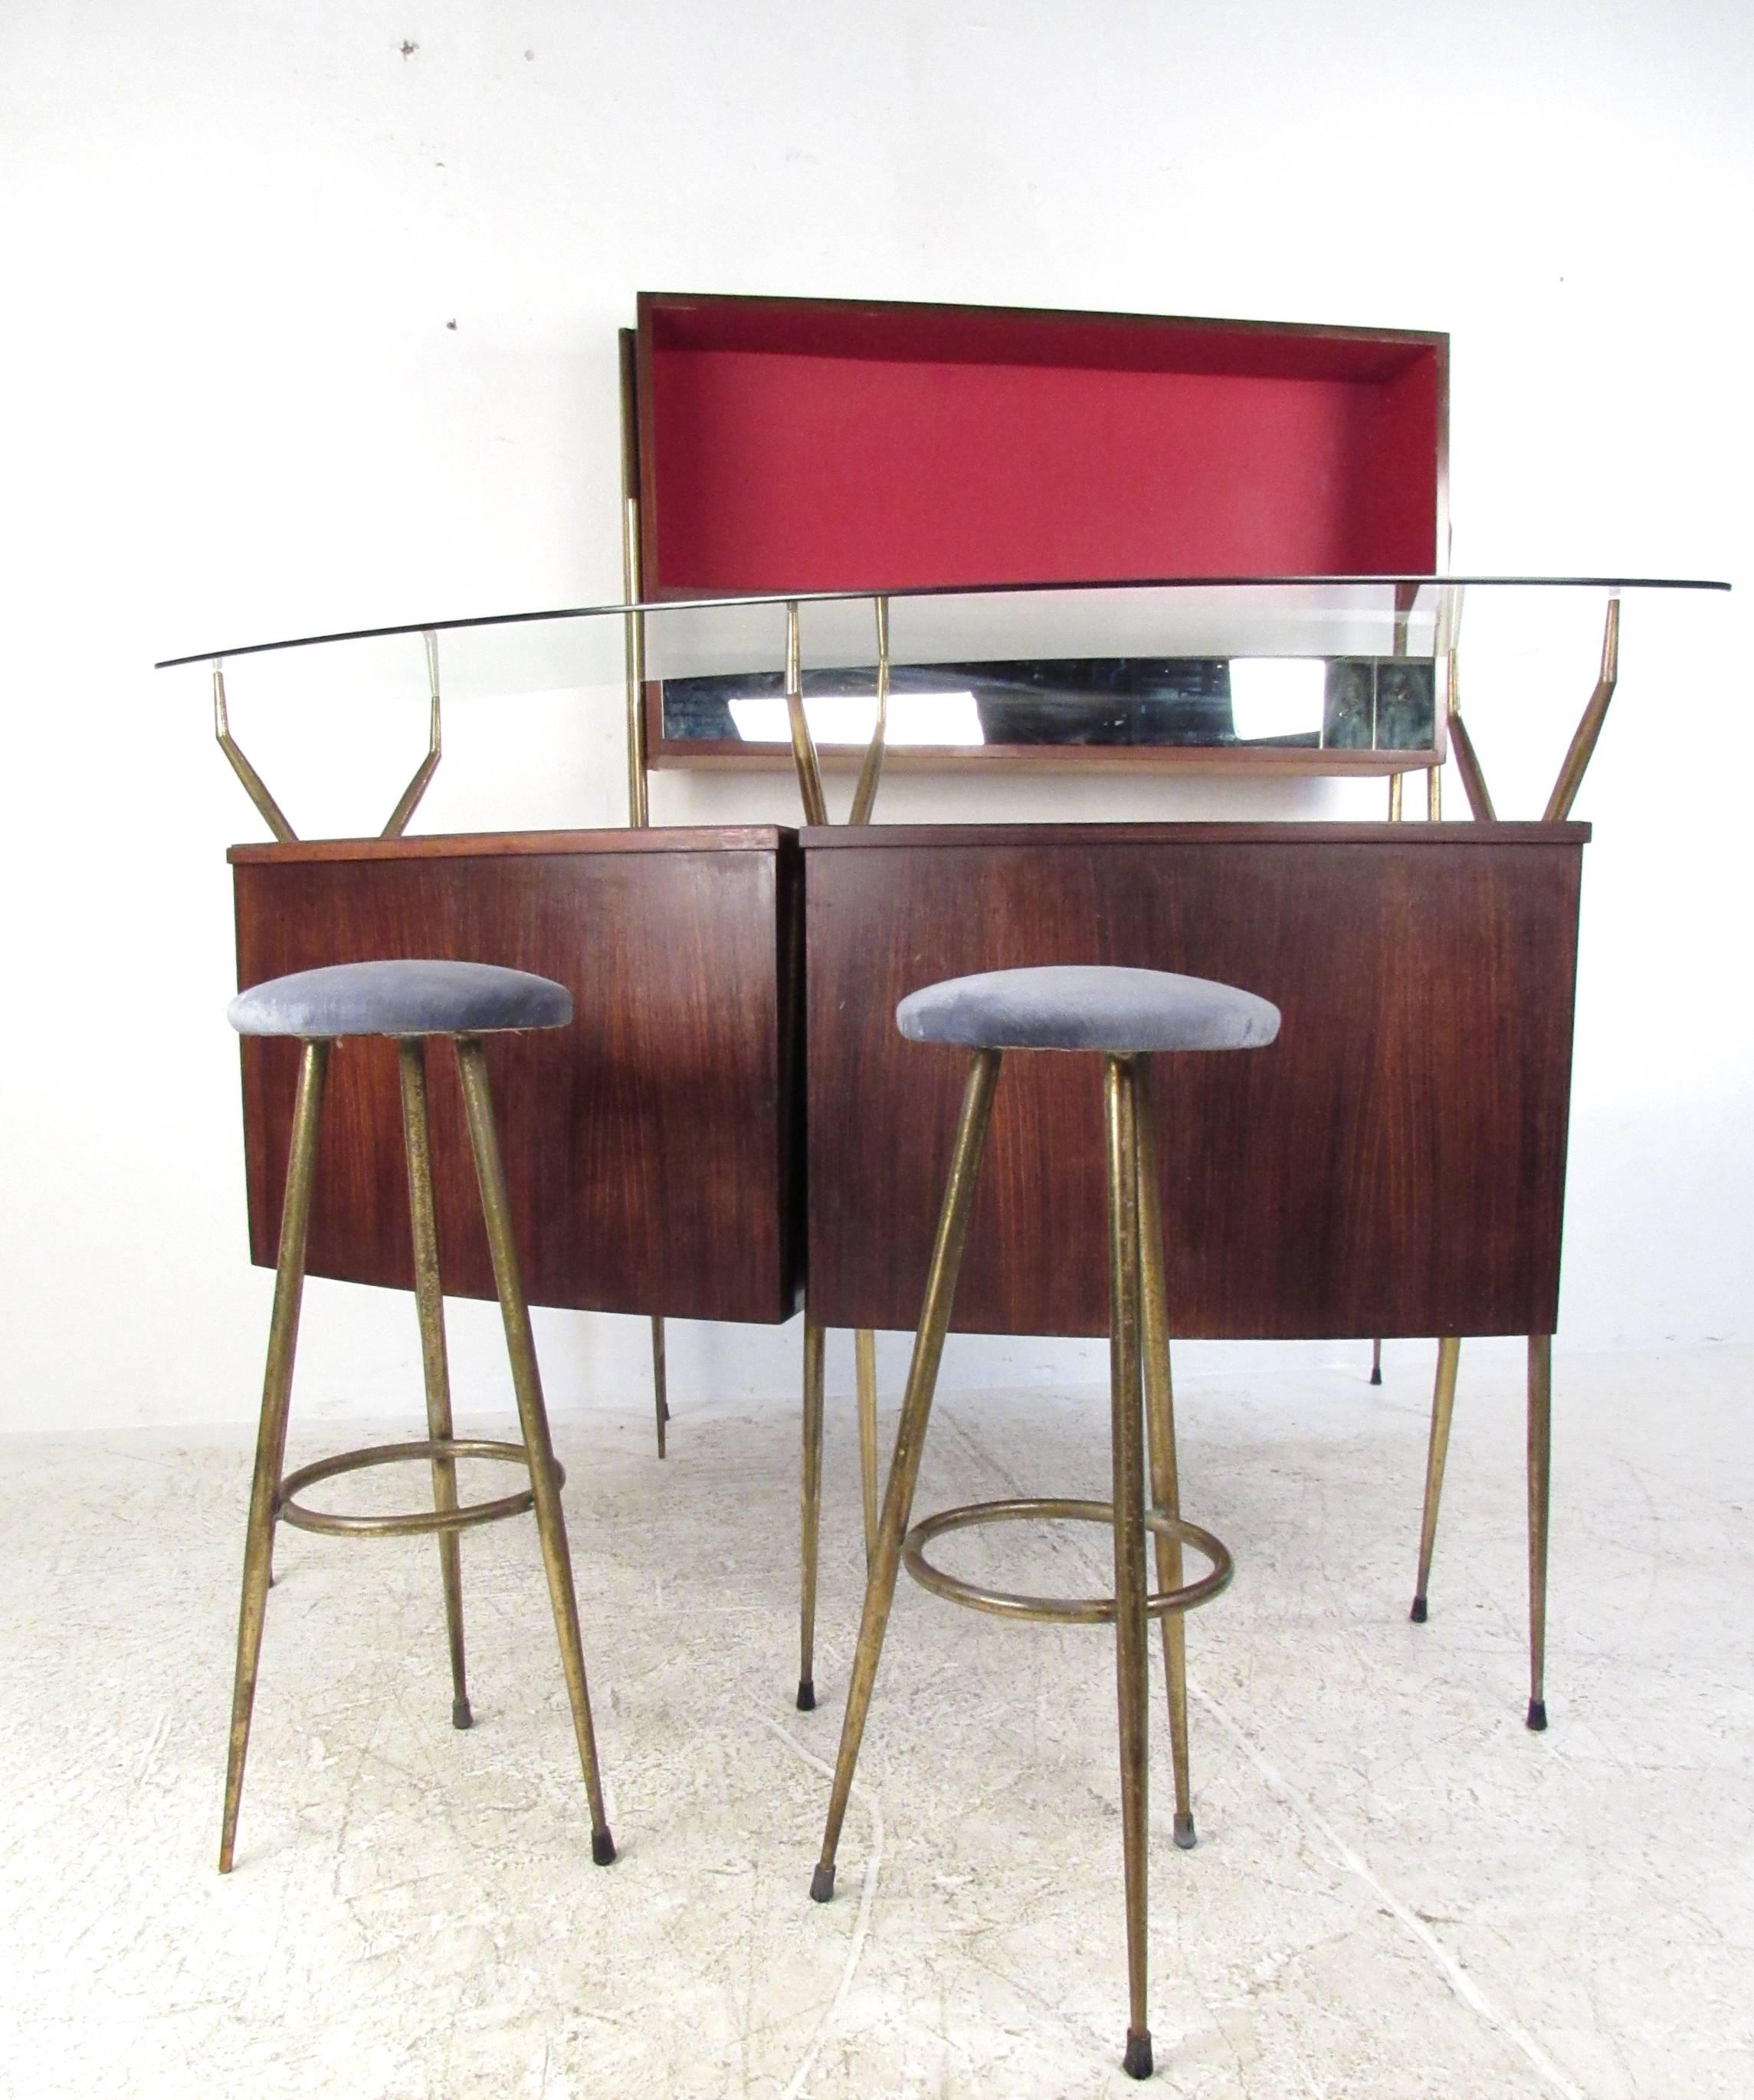 This beautiful modular bar features elegant hardwood construction with vintage brass trim. Pair of matching tripod bar stools perfectly complements the stylish tapered legs of the bar and storage cabinet. Curved glass top and spacious storage behind